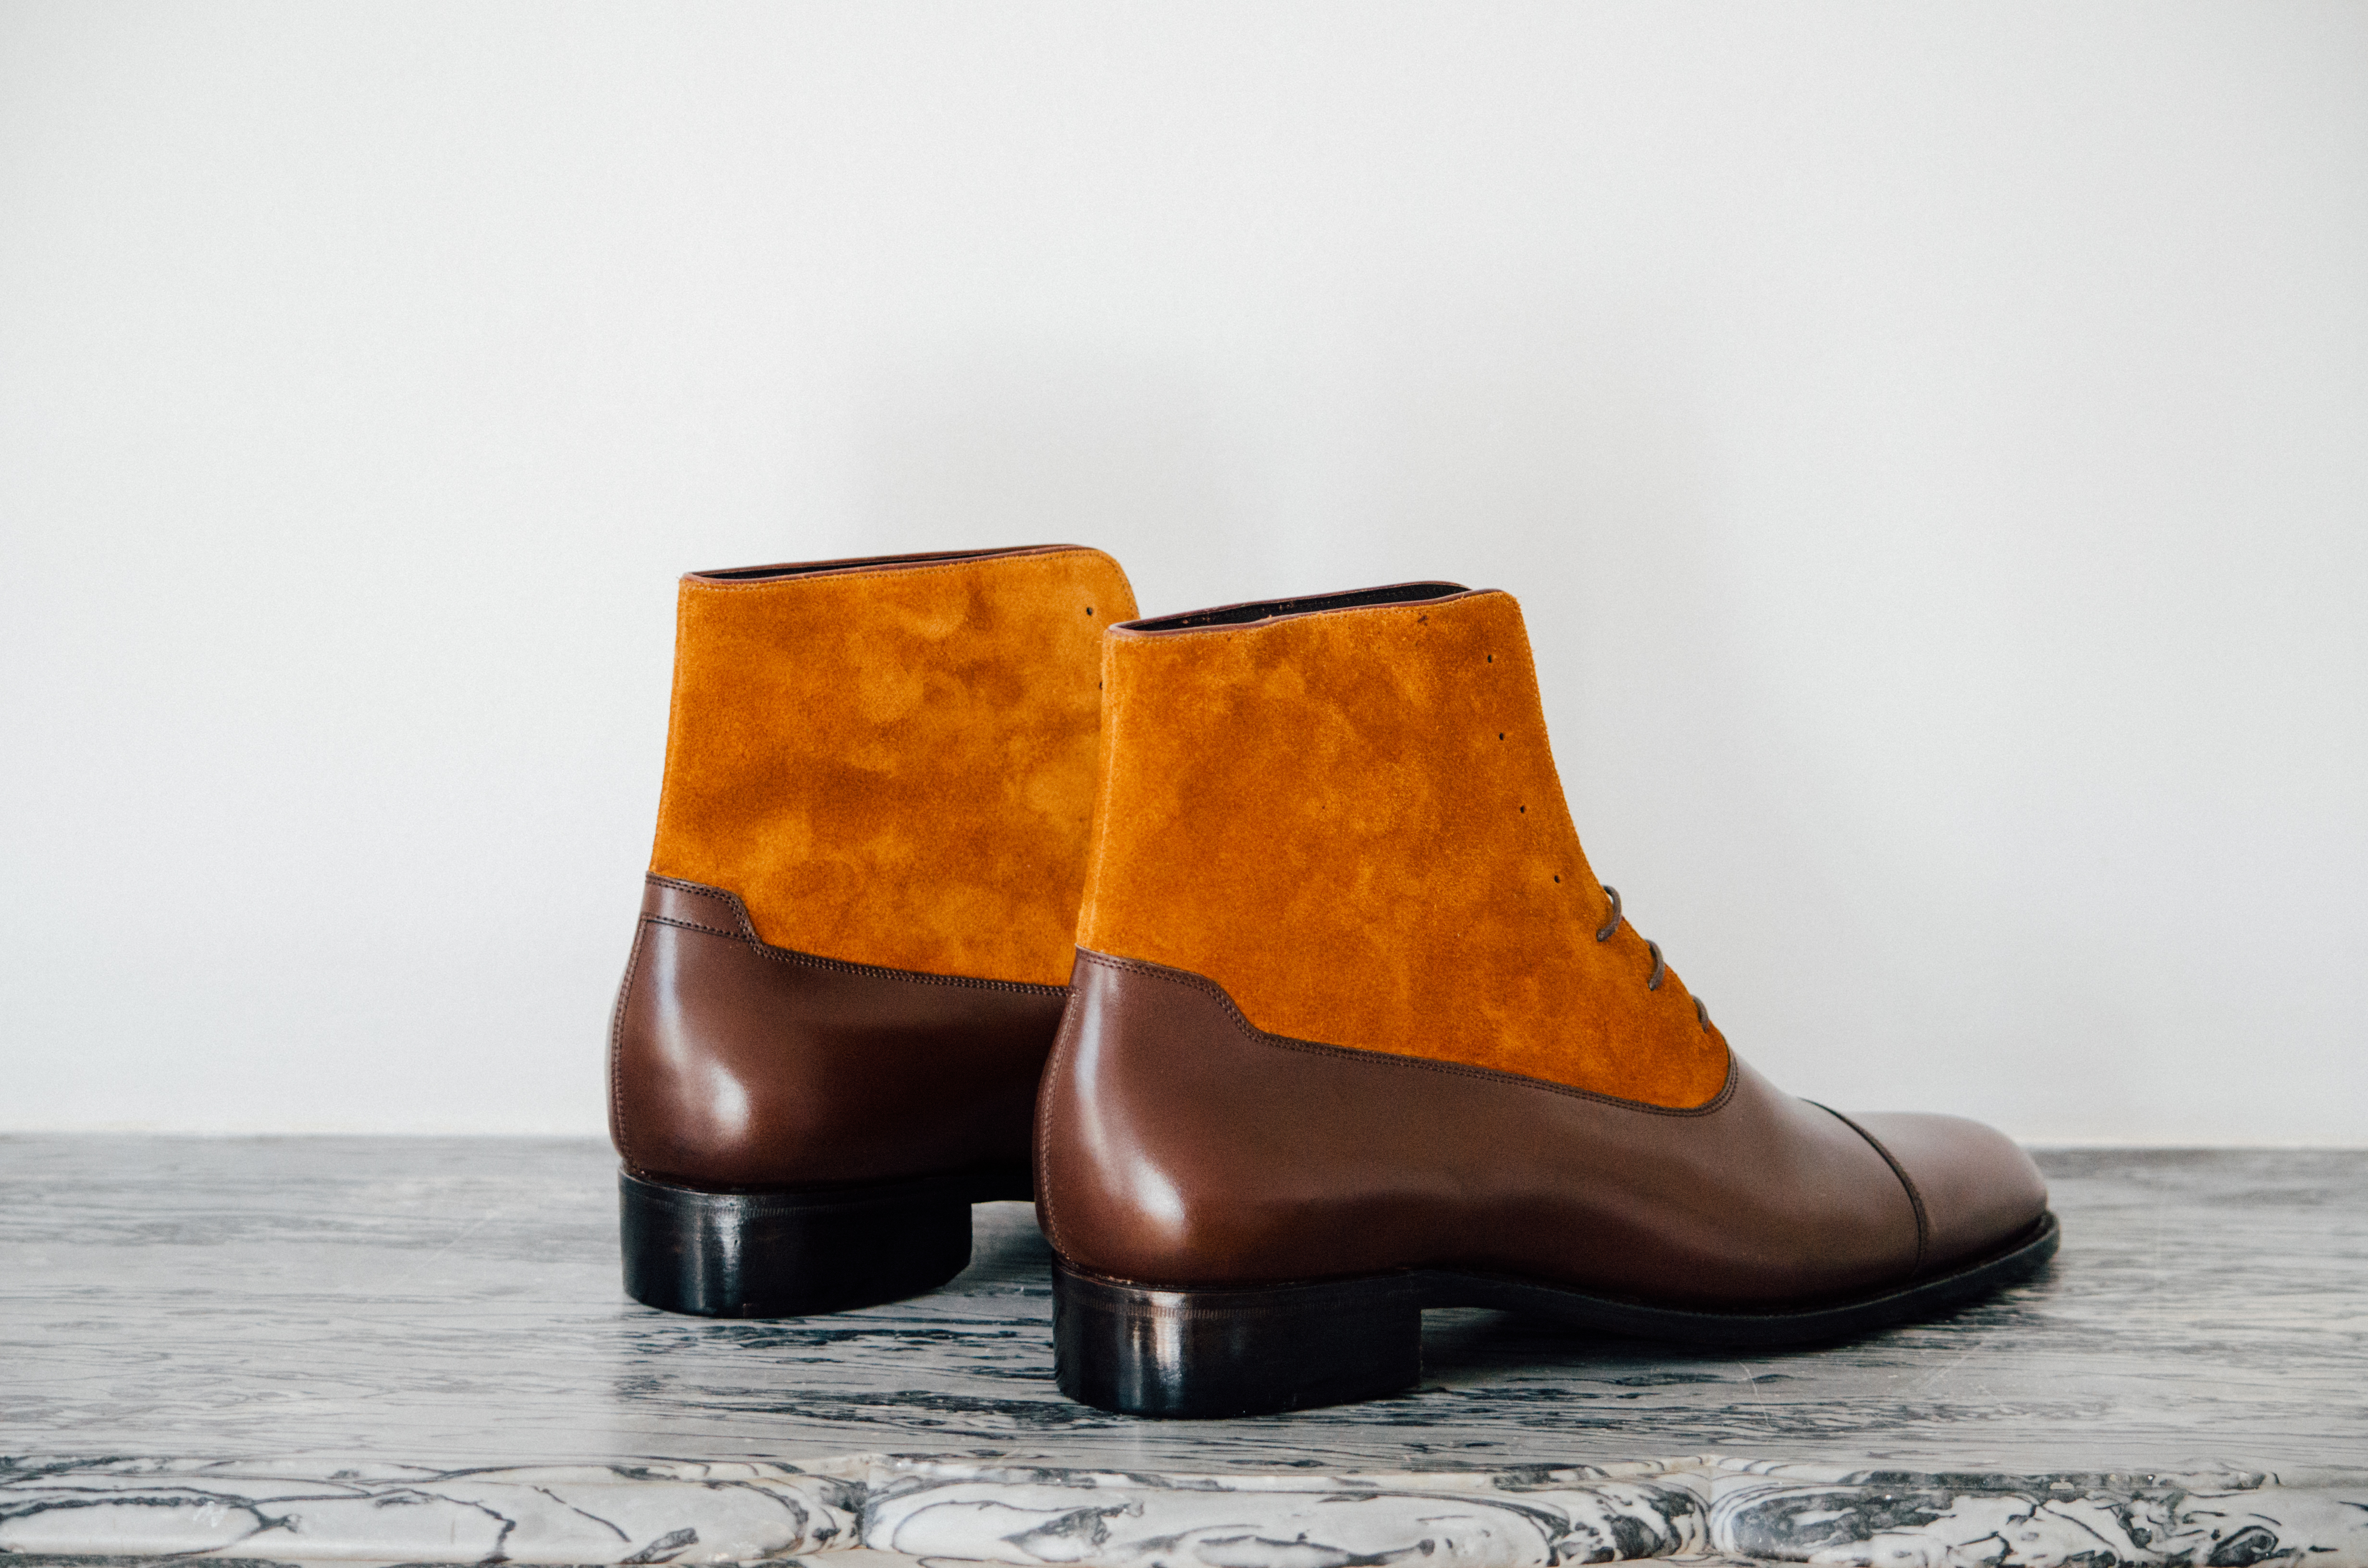 Chaussure luxe mesure Paris Mauban handcrafted Made to Order Balmoral Boots